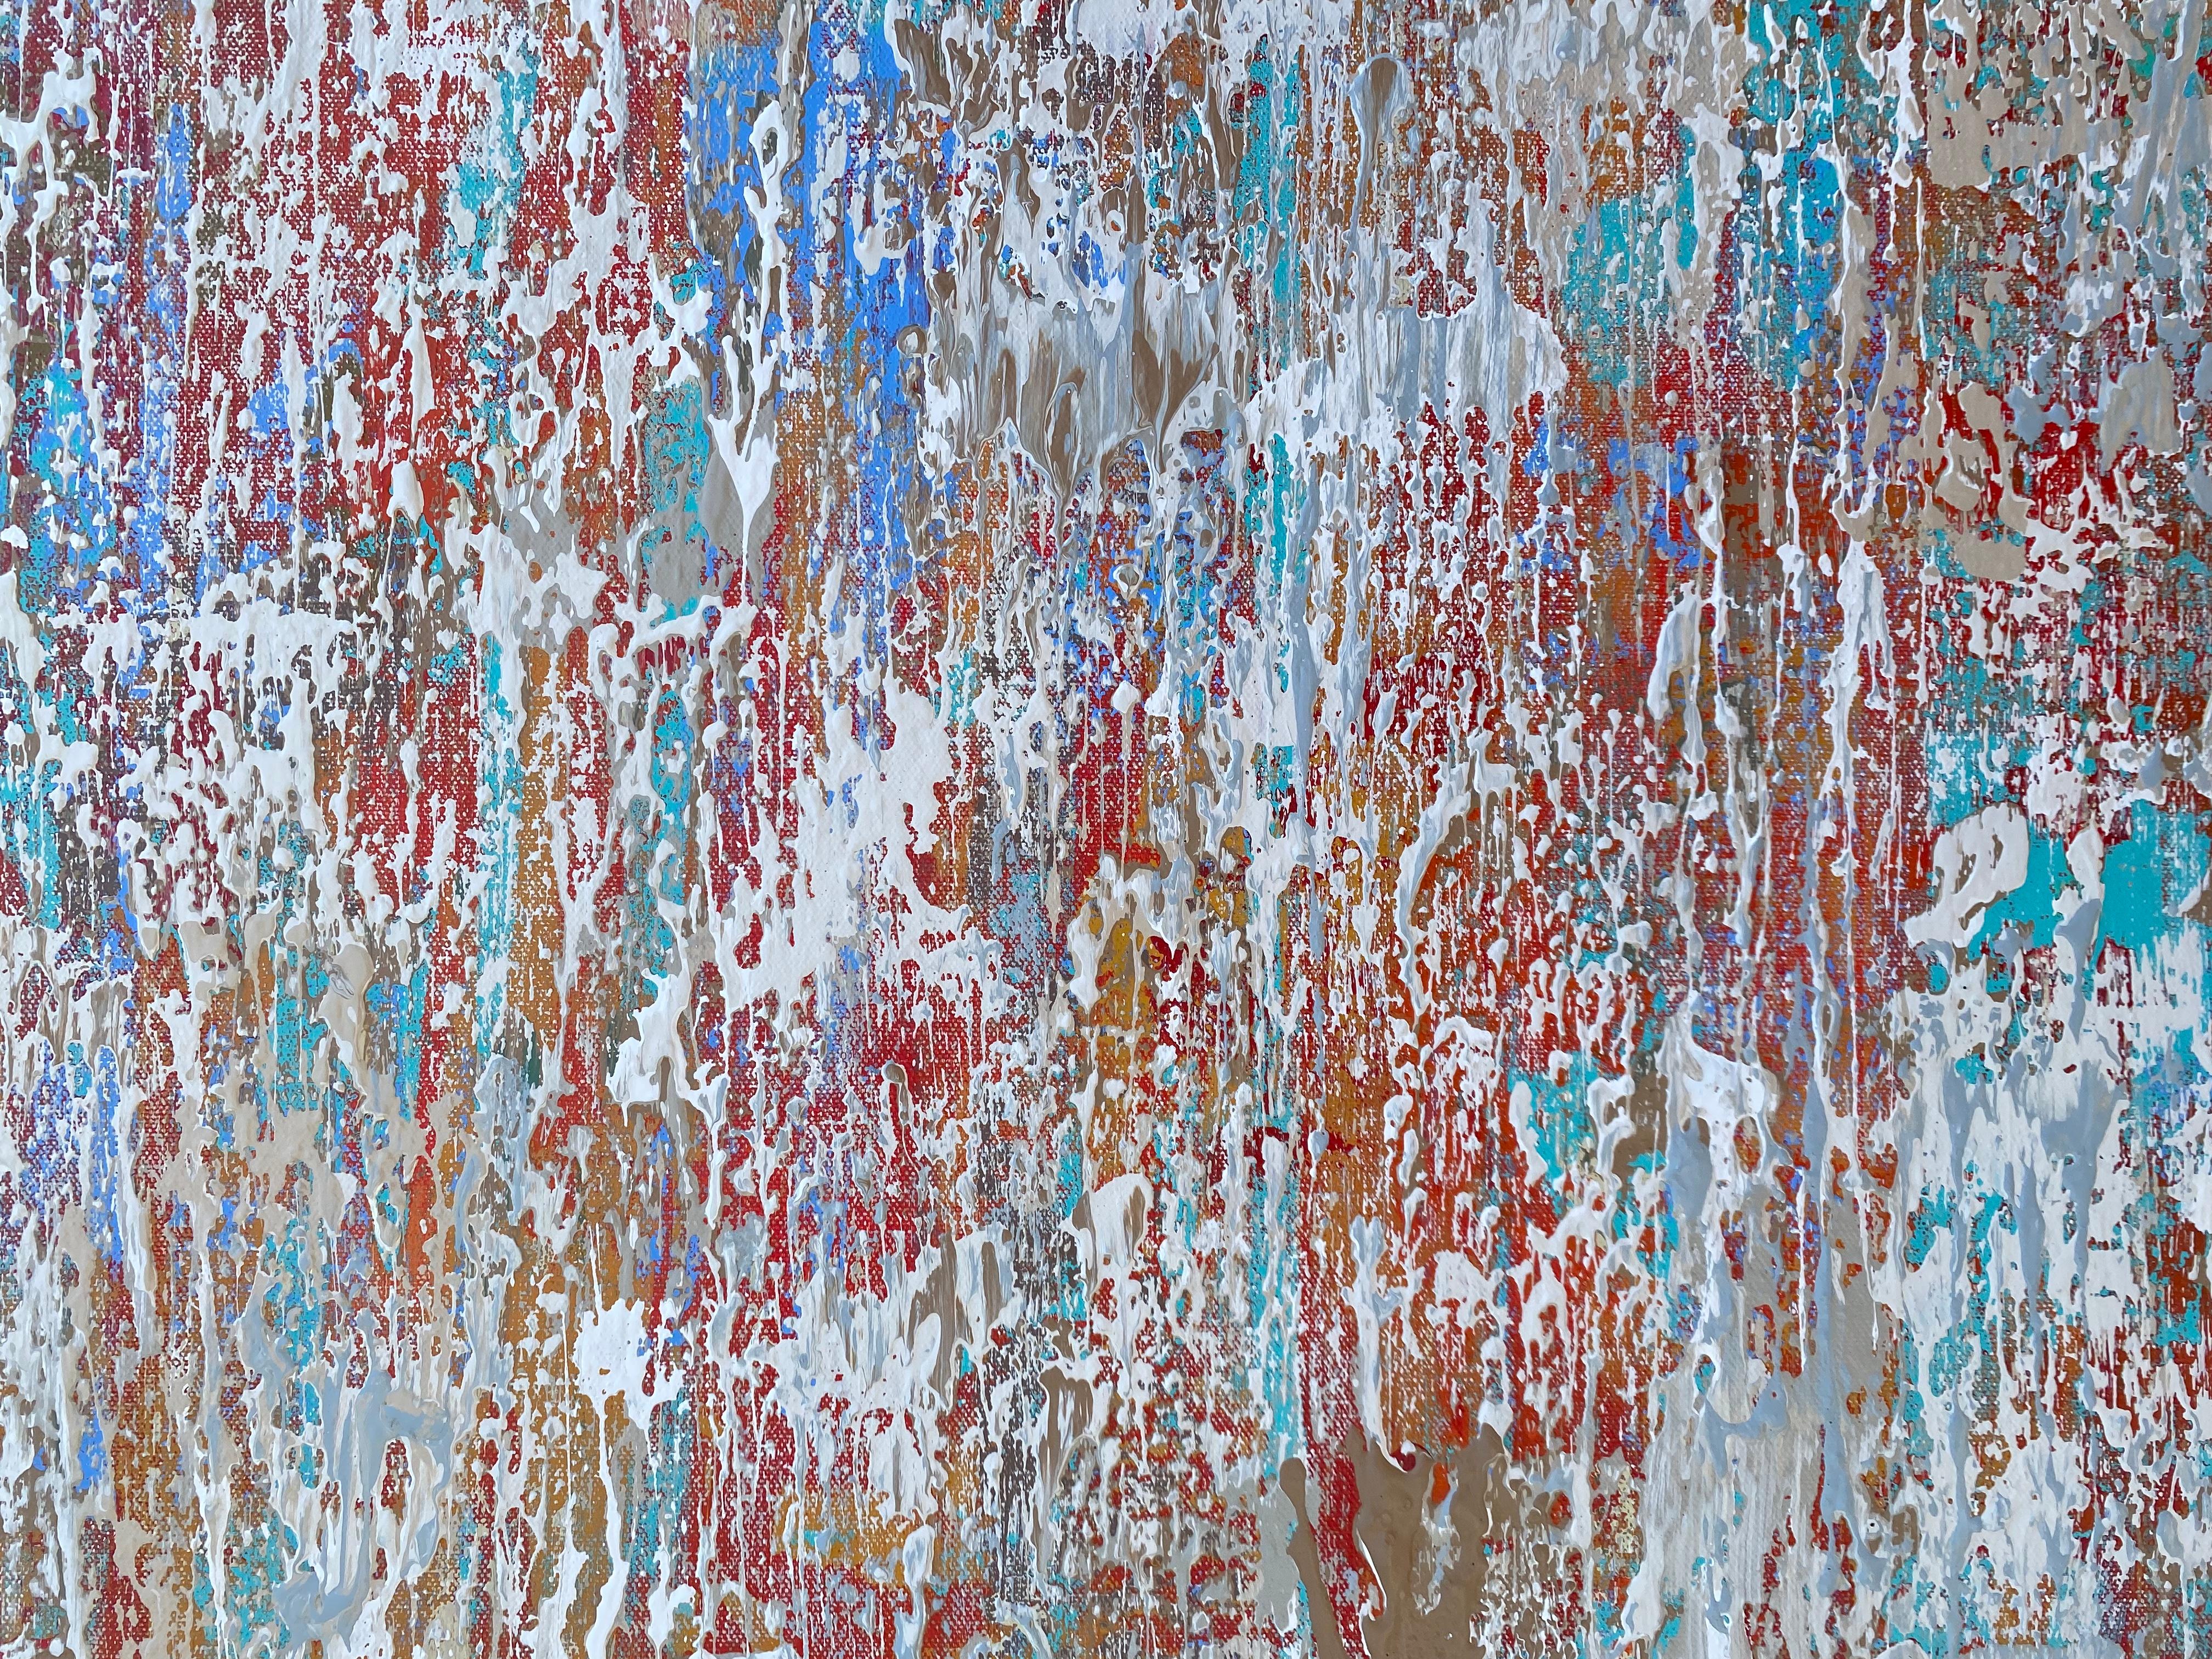 <p>Artist Comments<br>A vibrant and energetic abstract in hues of red, orange, and white with cooling tones of turquoise and blue by artist Alicia Dunn. Layers and layers of color dance on the canvas flowing harmoniously in one direction. It results